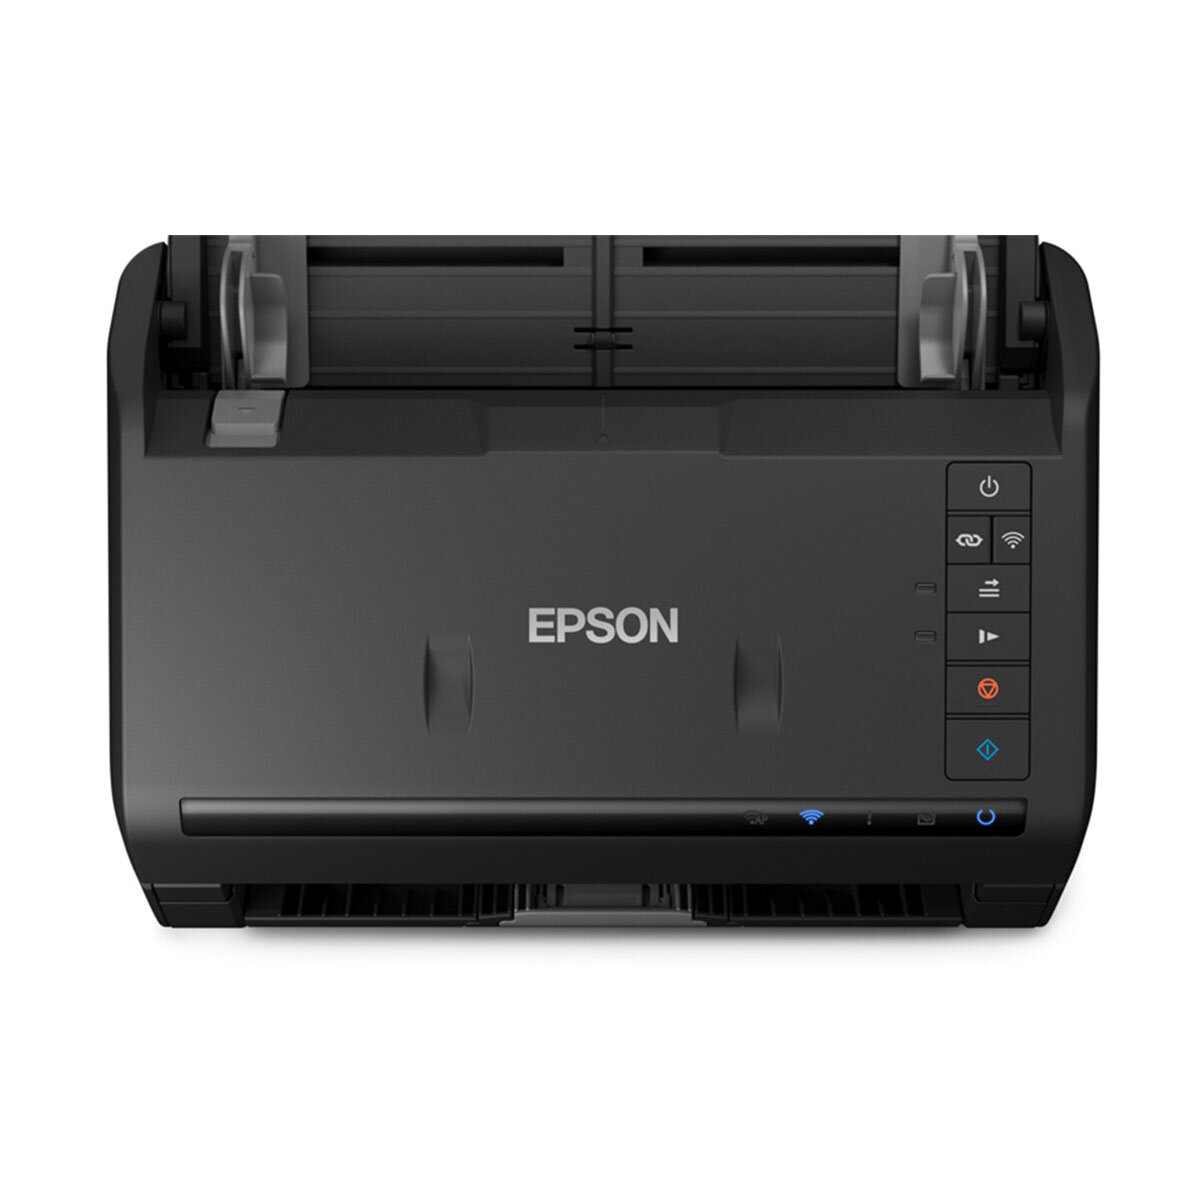 Buy Epson WorkForce ES-500W Scanner Feature2 Image at Costco.co.uk